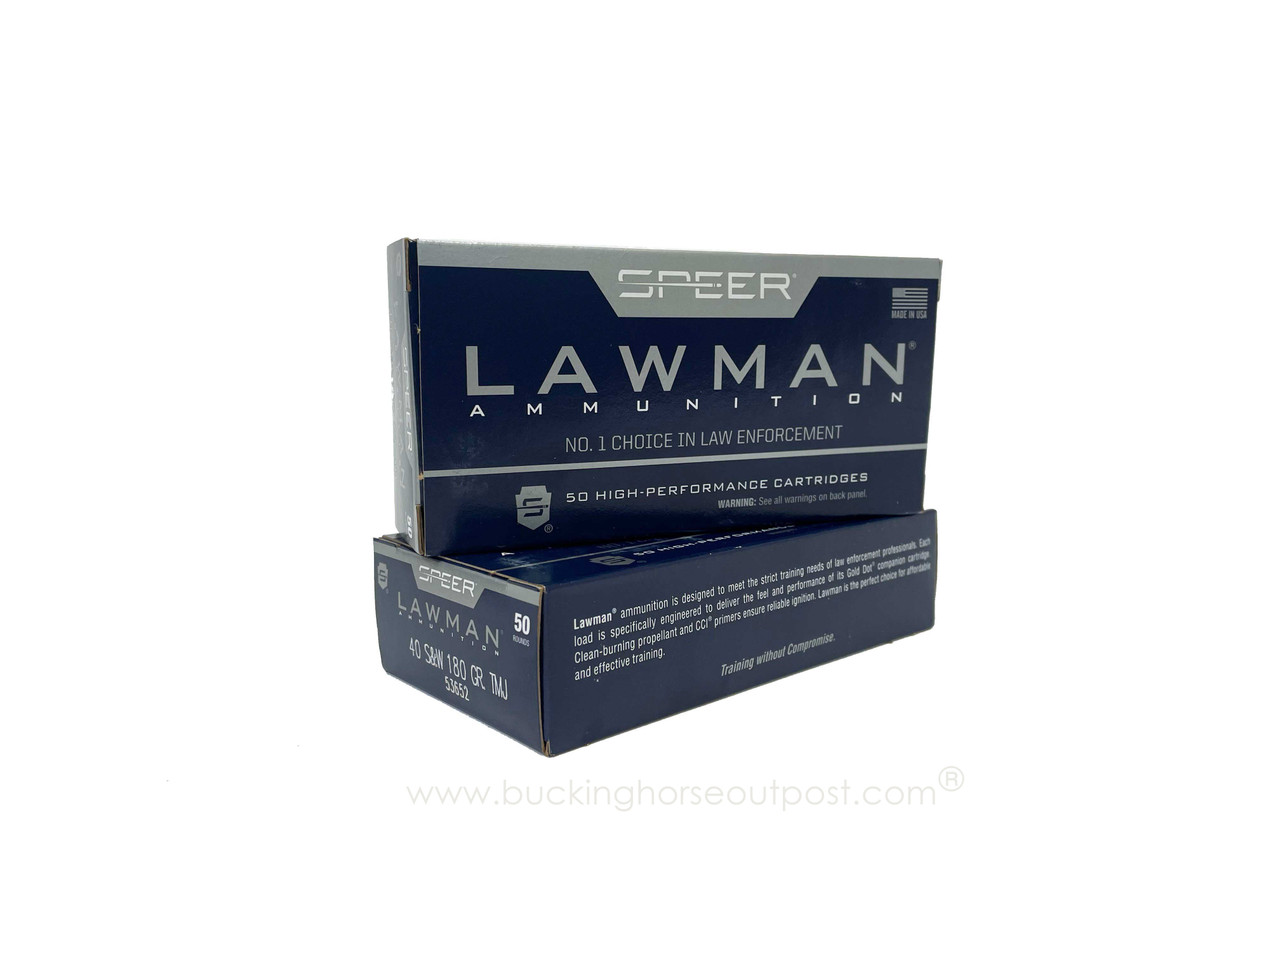 Speer Lawman .40 S&W 180 Grain Total Metal Jacket  50rds Per Box (53652) Police Trade In- FREE SHIPPING ON ORDERS OVER $175